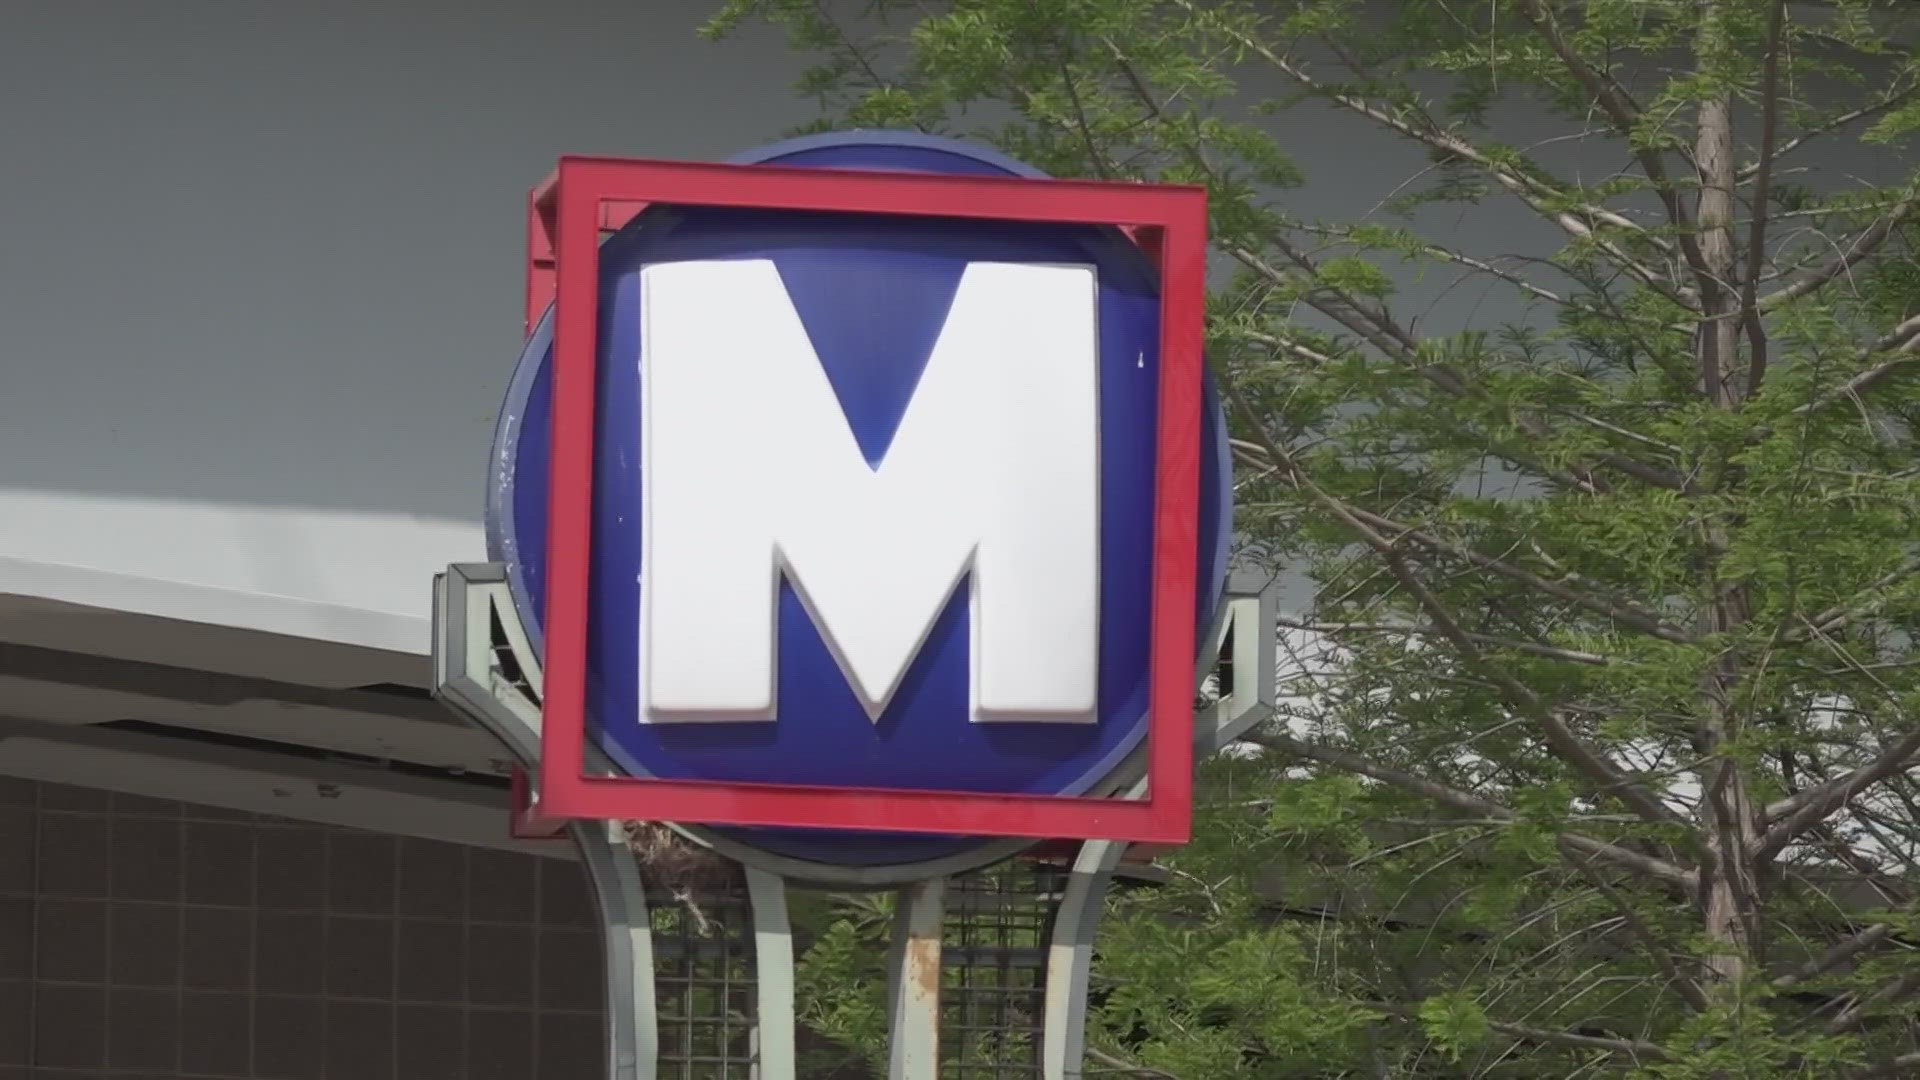 Bi-State Development owns Metro Transit and will buy the metal detectors, which will be moved around to different stations across Missouri and Illinois.